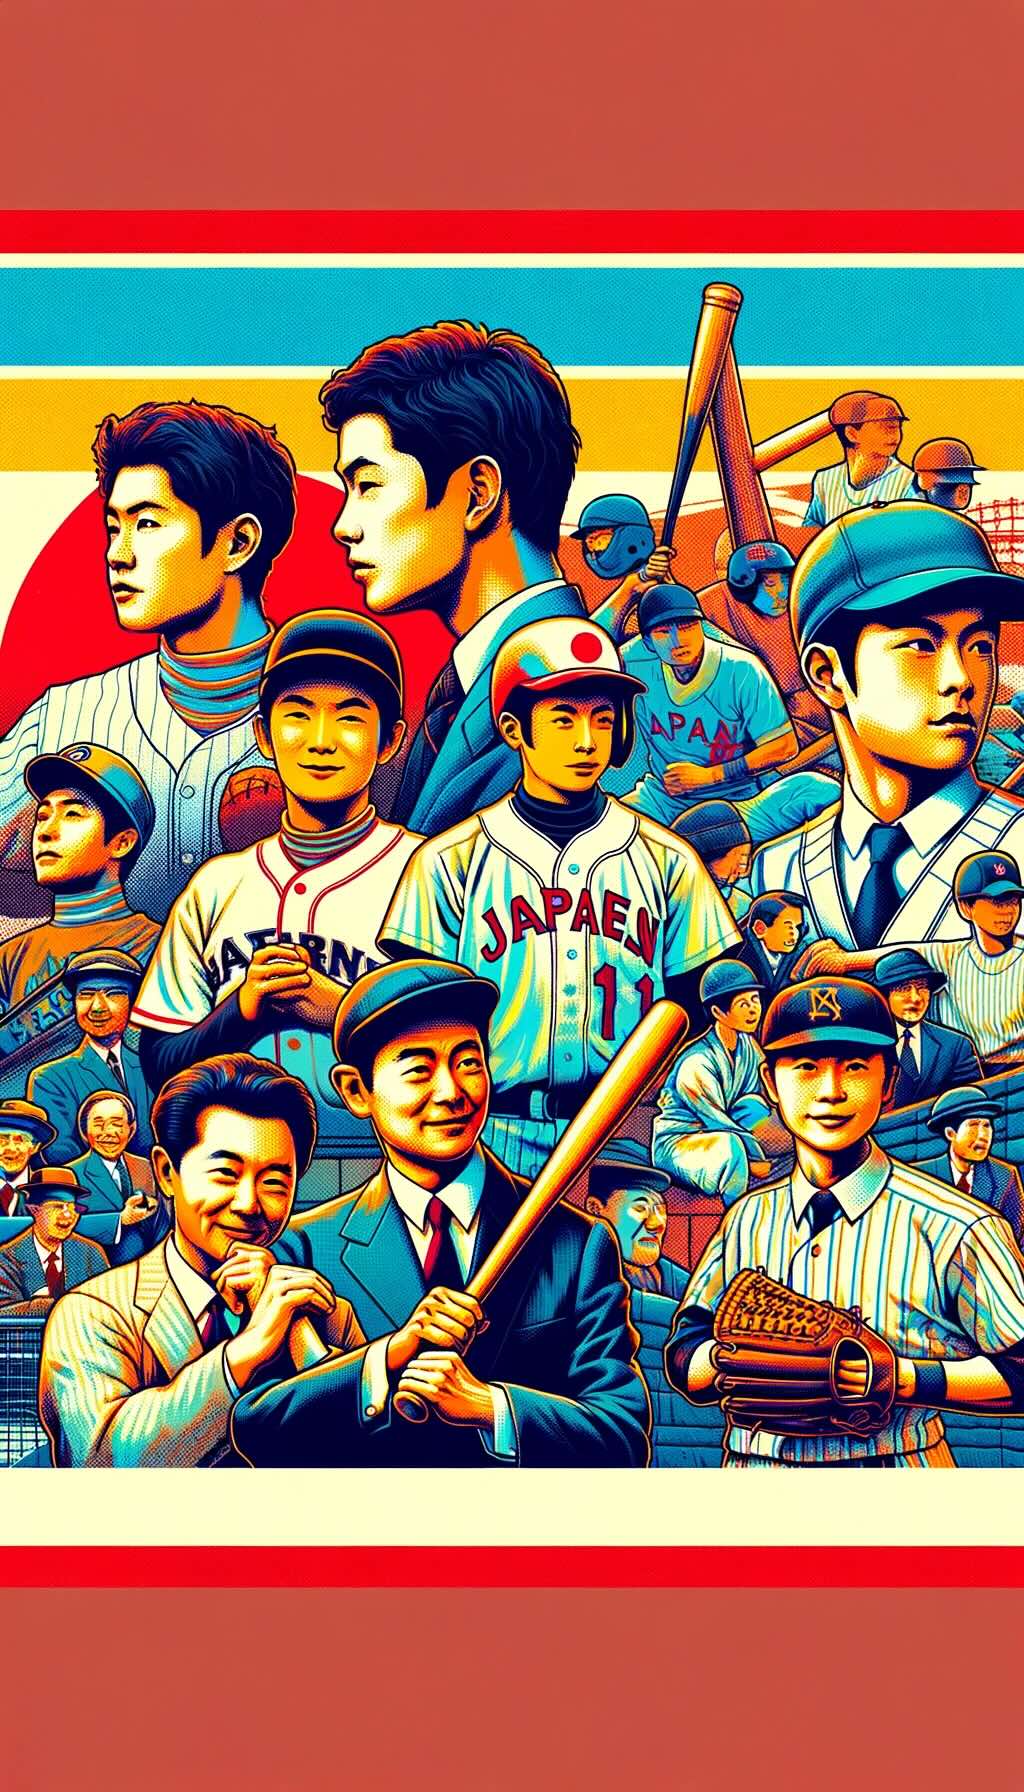 Exploring How These Players Have Influenced Japanese Culture and Society - digital art 